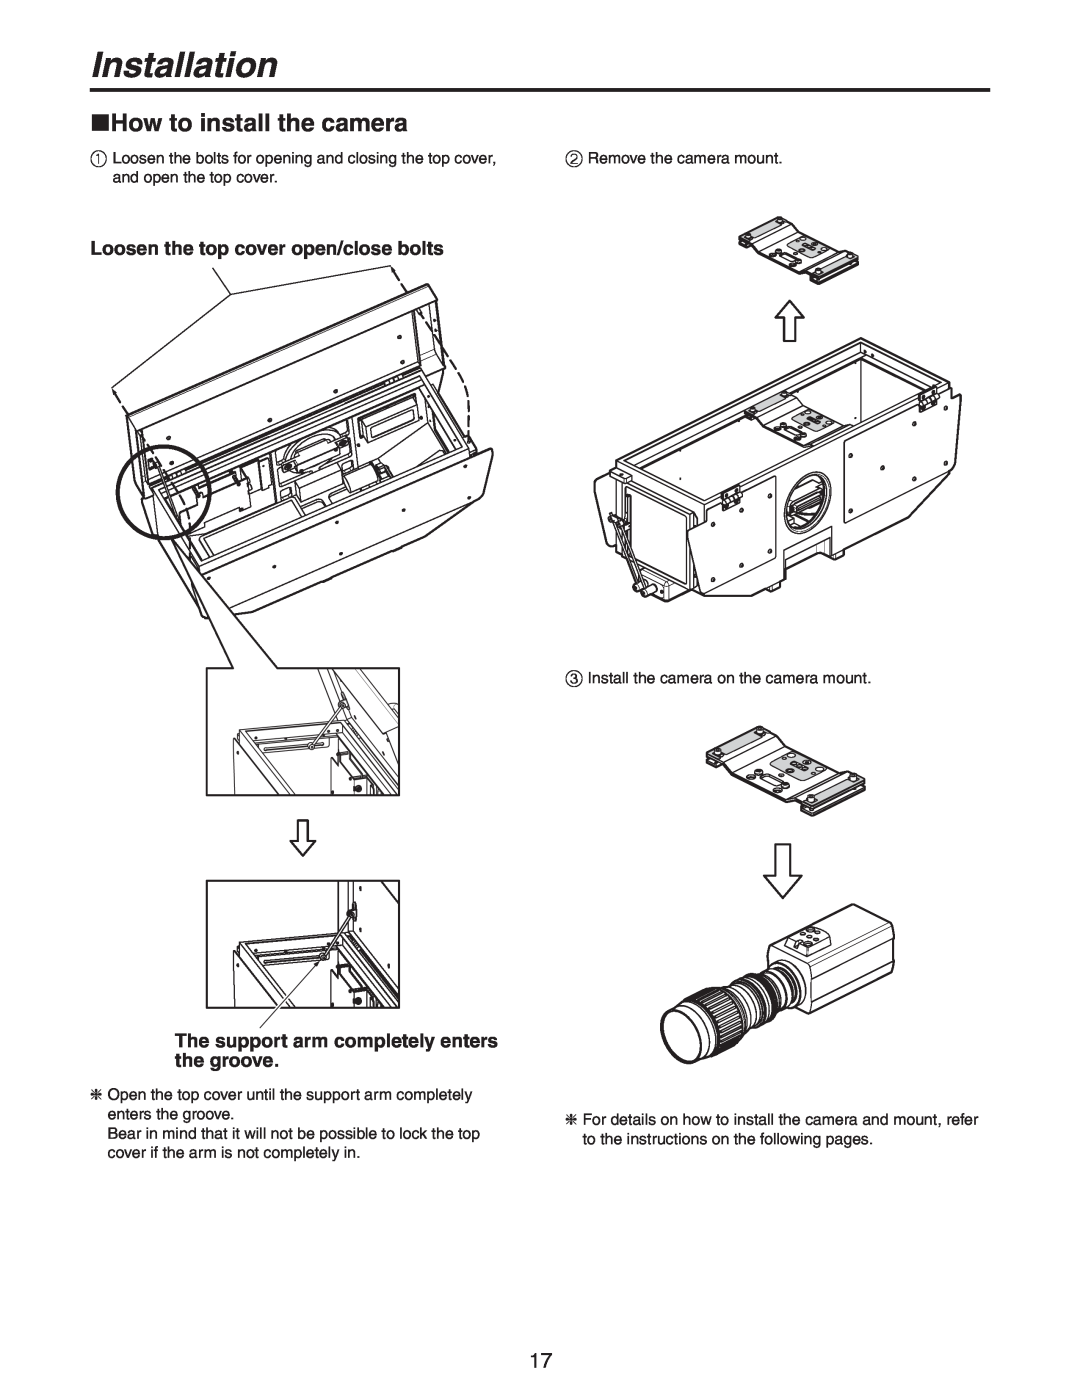 Panasonic AW-PH650N manual How to install the camera, Installation, Loosen the top cover open/close bolts 